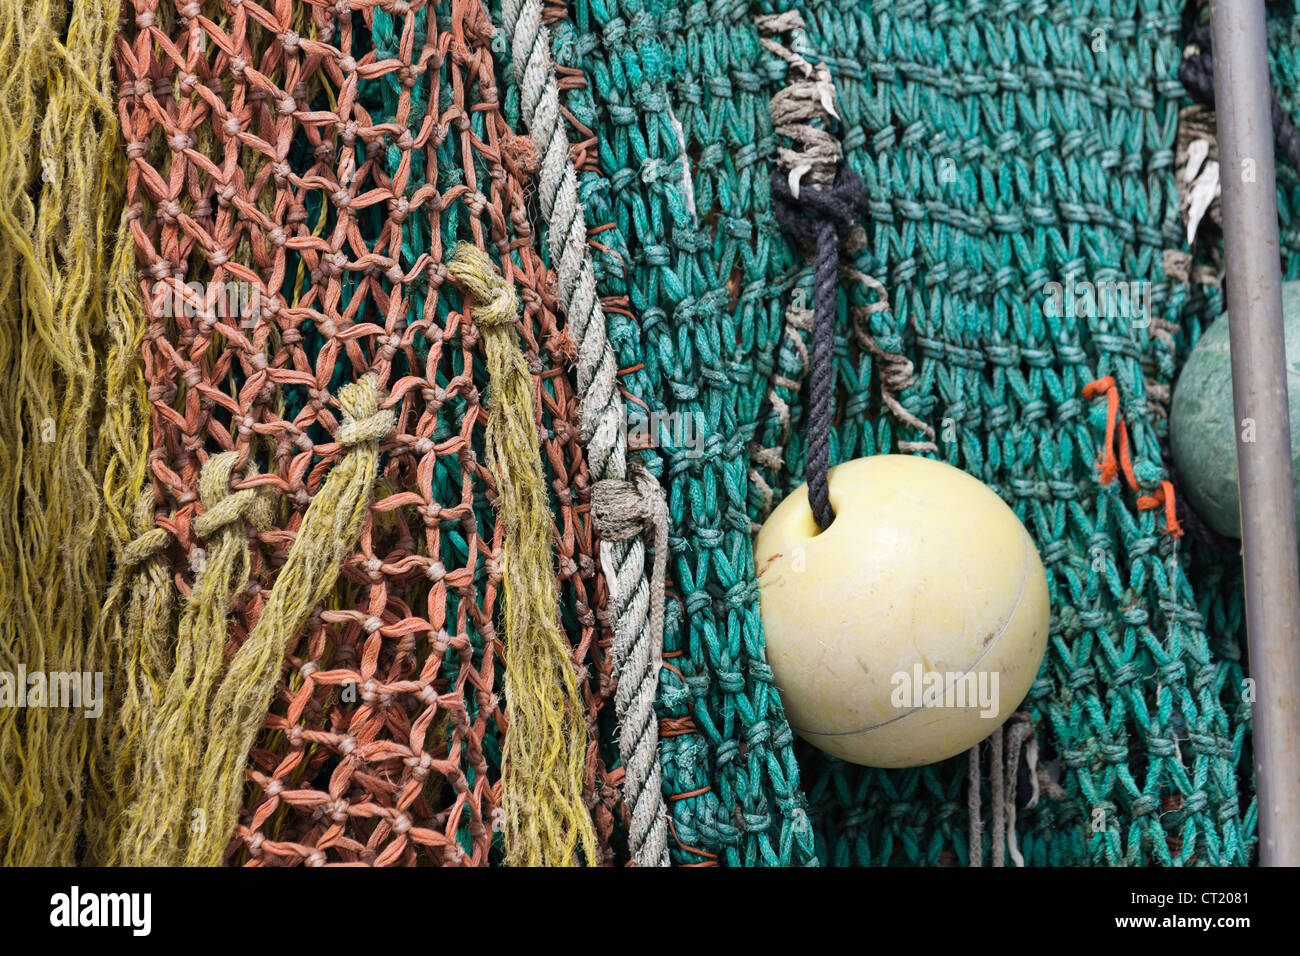 Background Colorful Fishing Nets Floats Close Stock Photo 1526074235